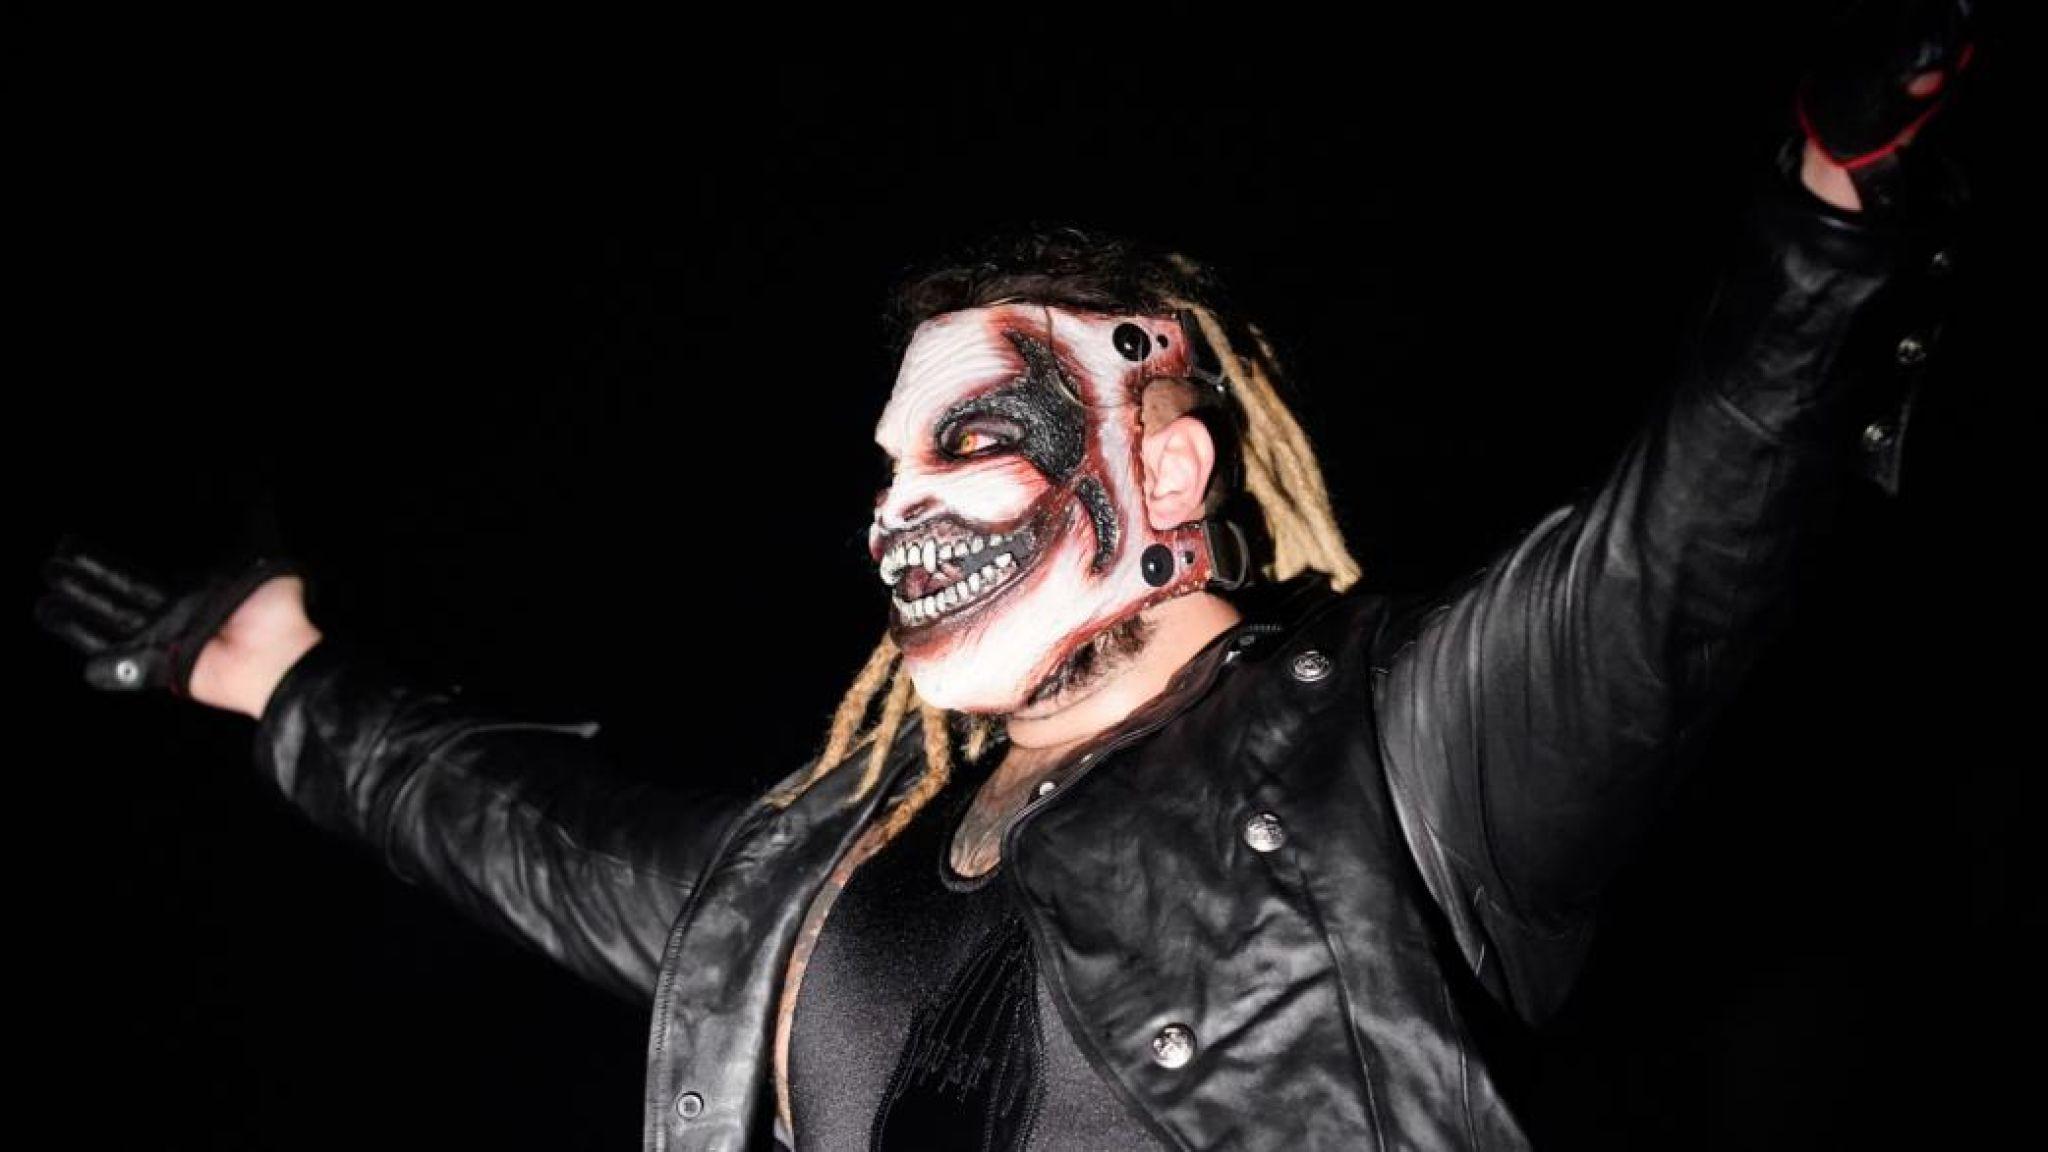 Bray Wyatt debuts The Fiend with attack on Finn Balor on Raw. WWE